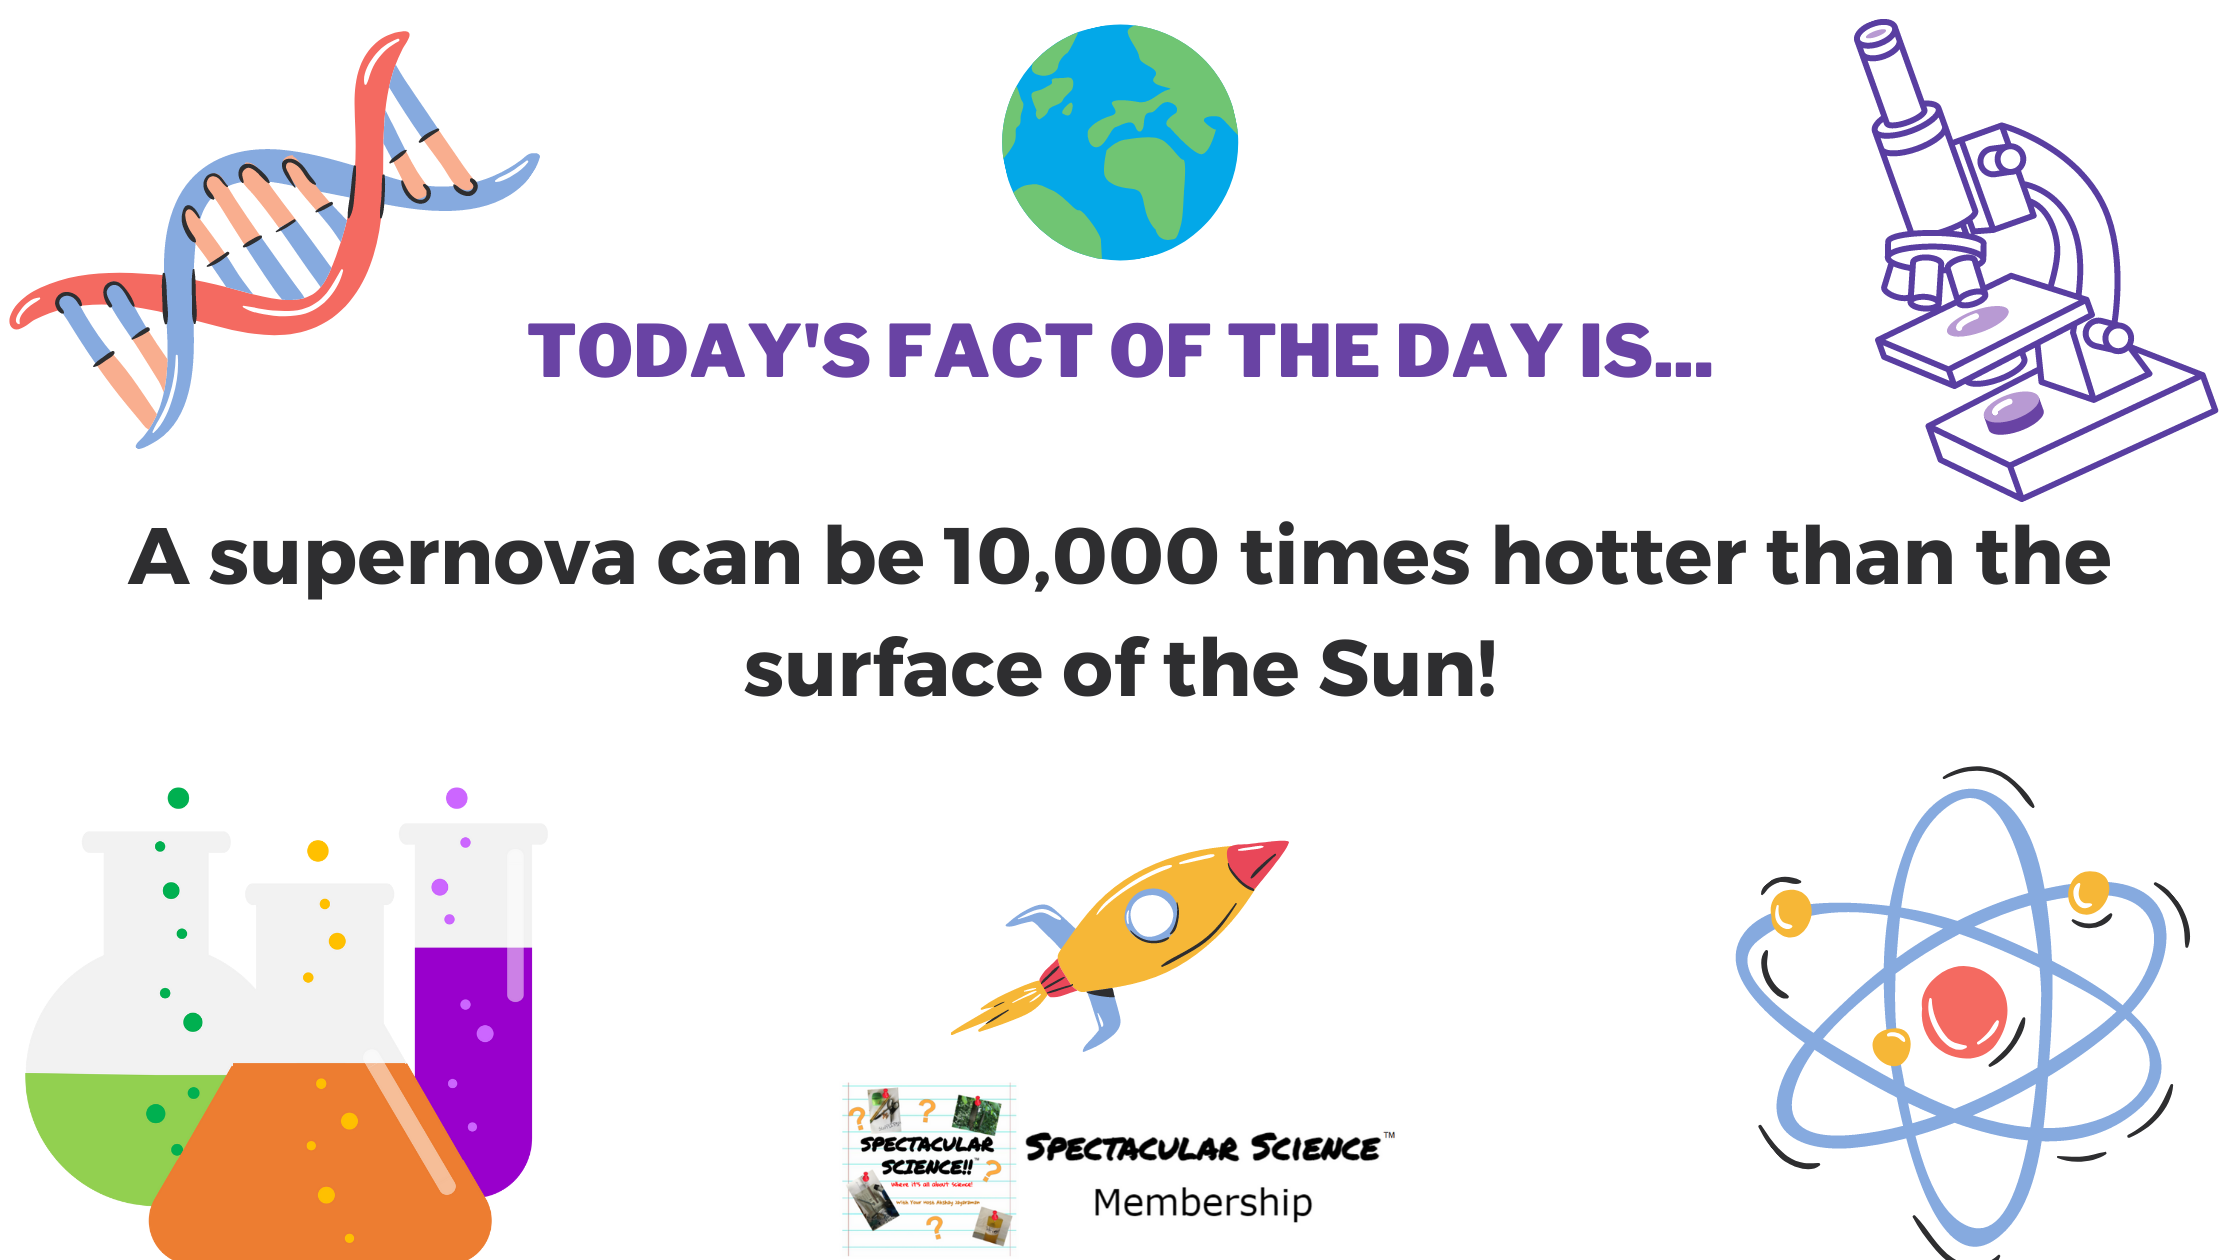 Fact of the Day Image Mar. 27th